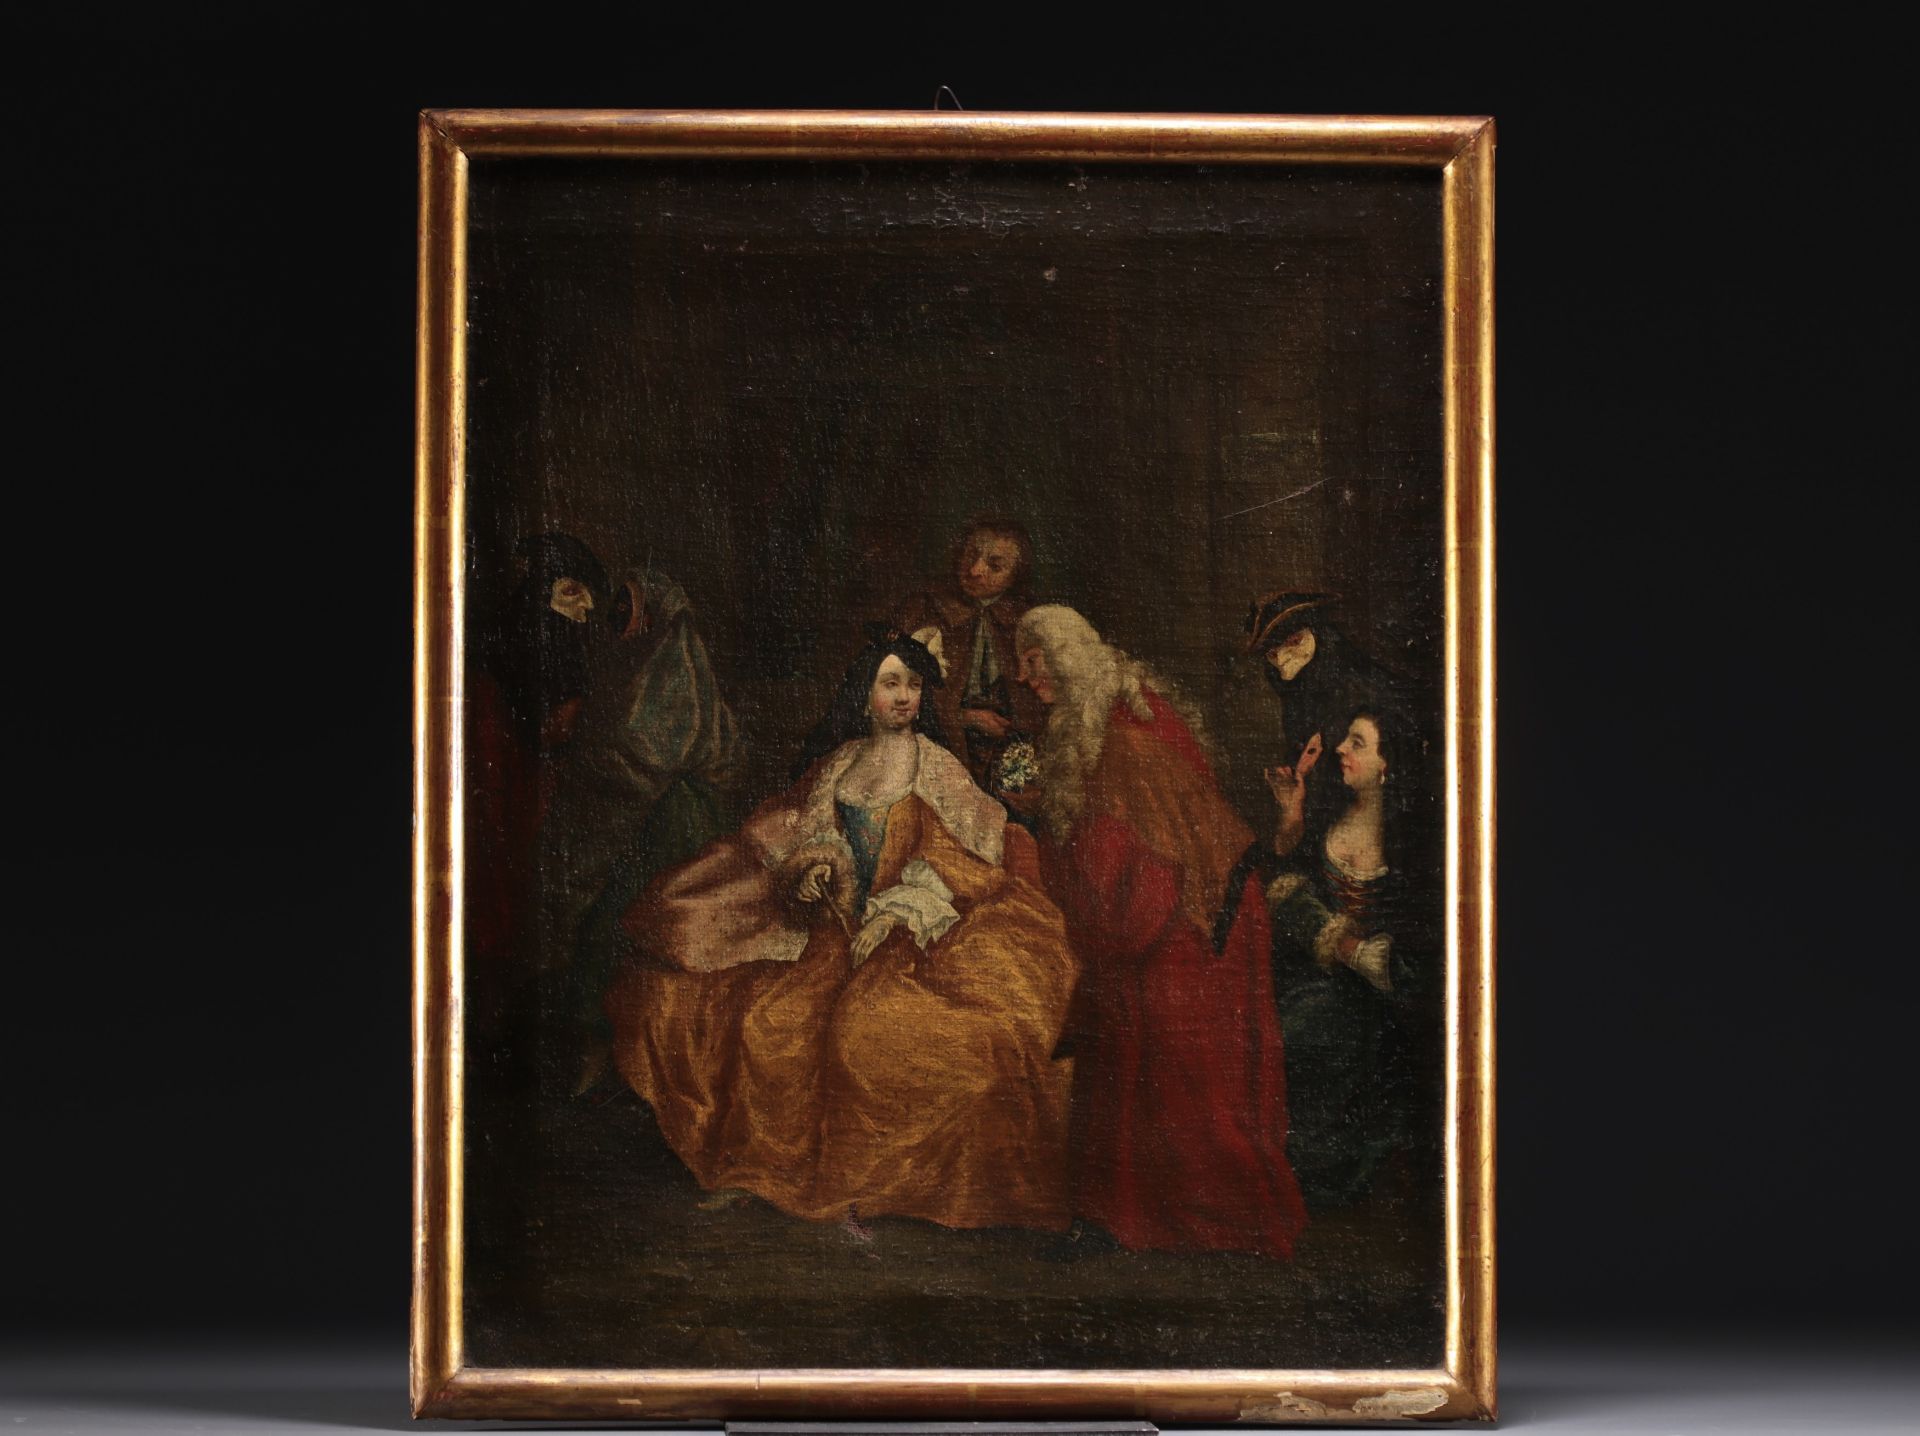 "Reunion with masked figures" in the style of Pietro LONGHI, oil on canvas, 18th century Italian sch